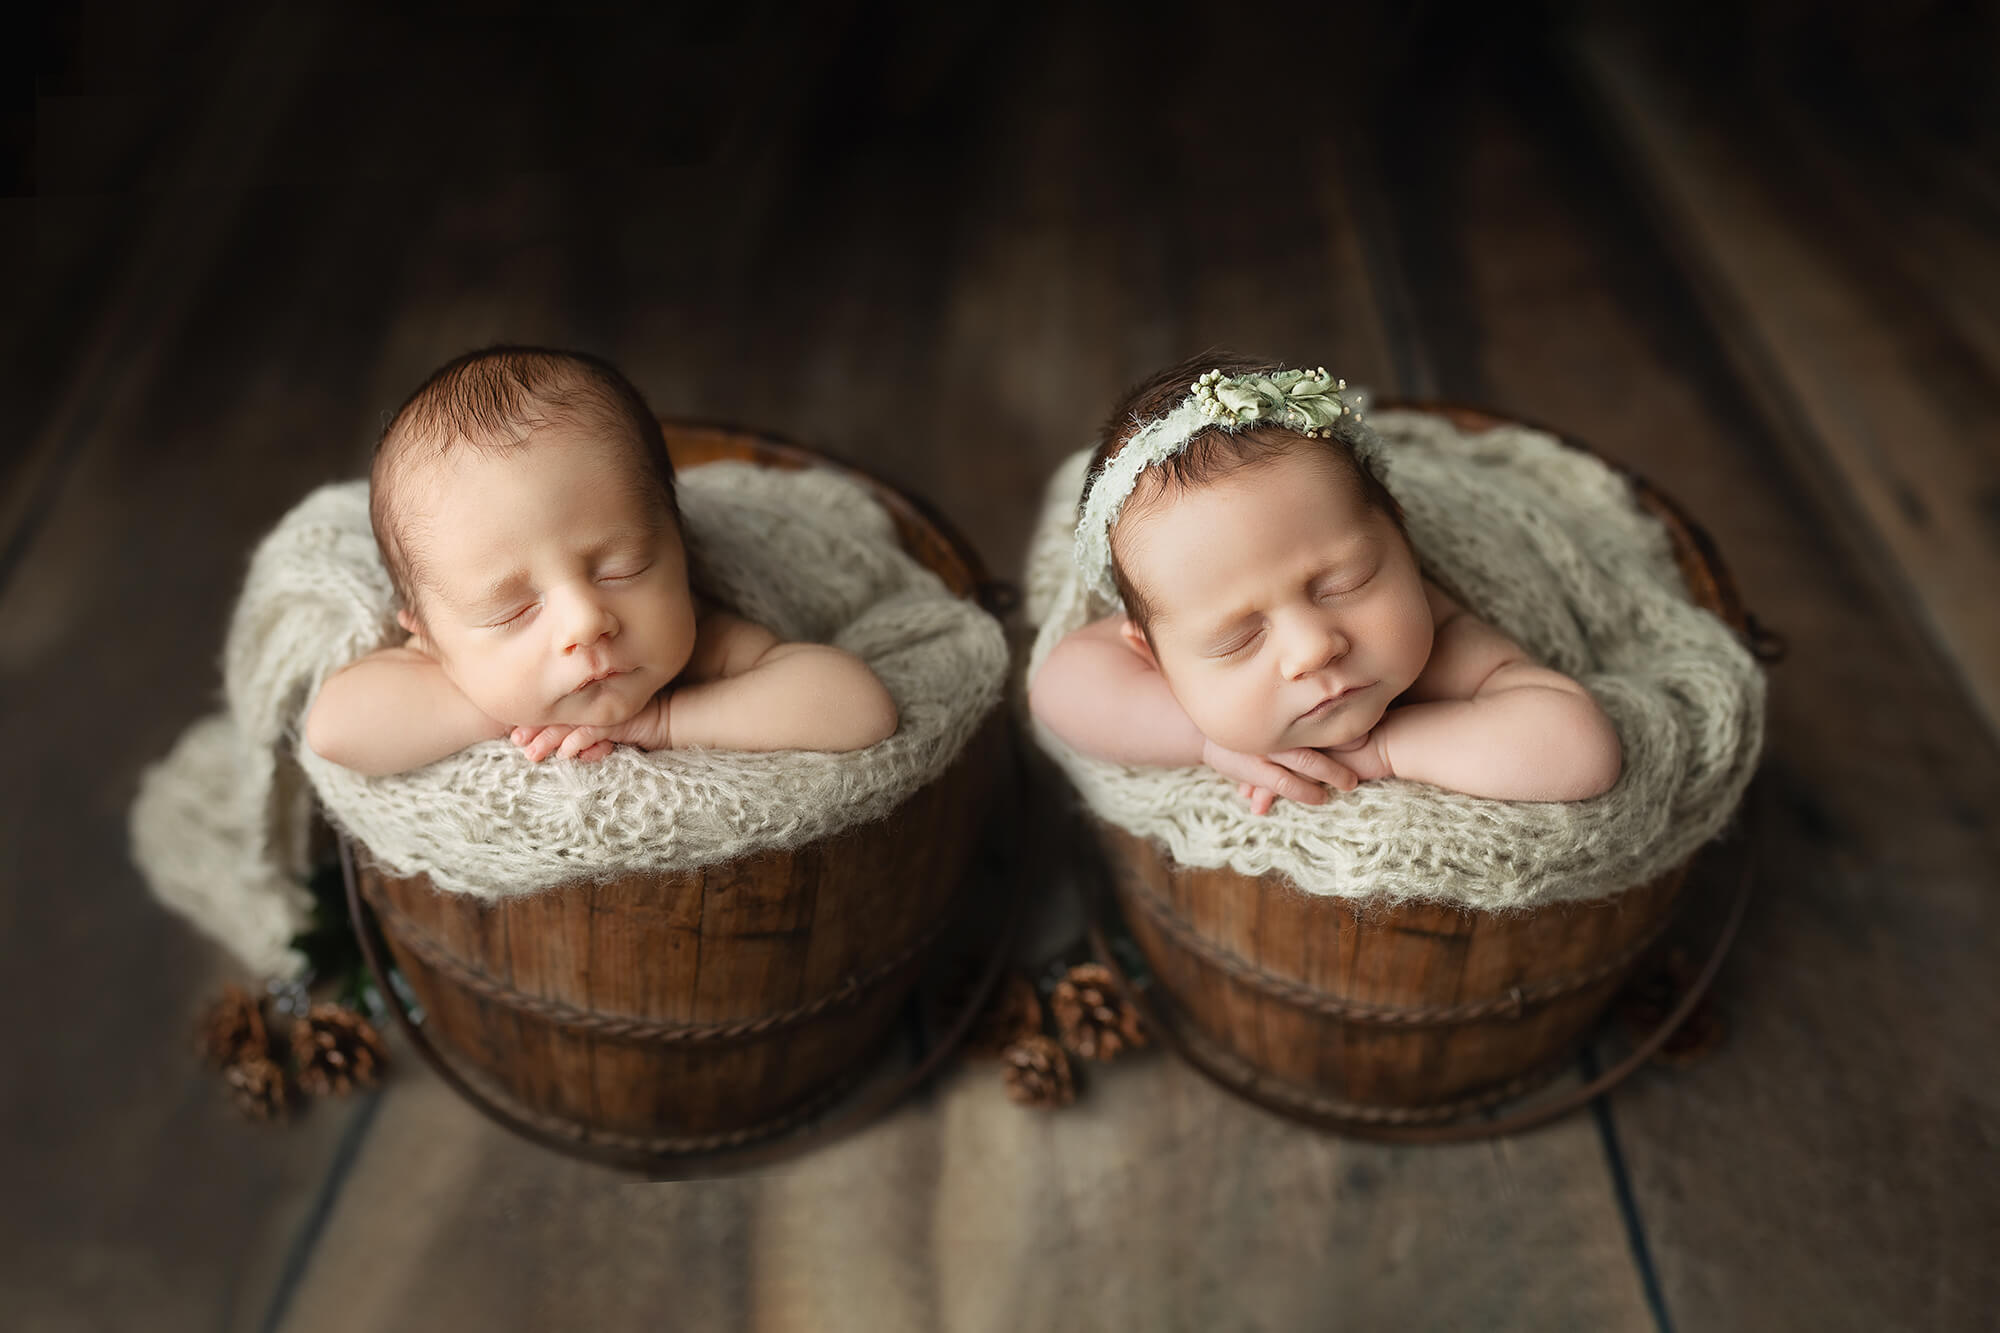 Twin babies sleeping peacefully in wooden buckets taken during their newborn session.